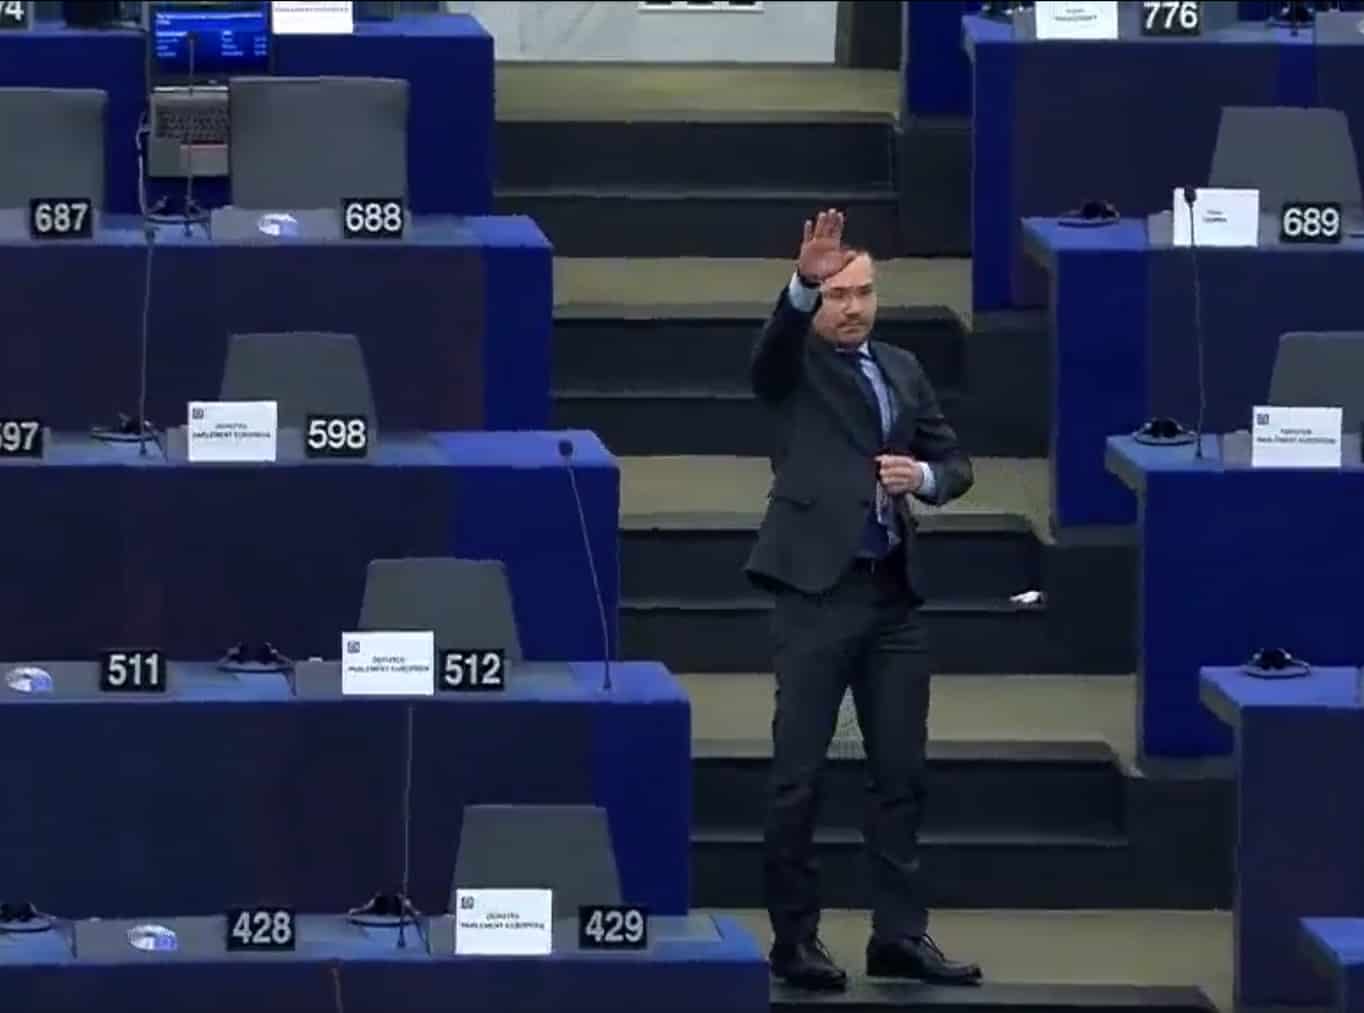 Bulgarian MEP sitting in EU party founded by the Tories gives Nazi salute in parliament